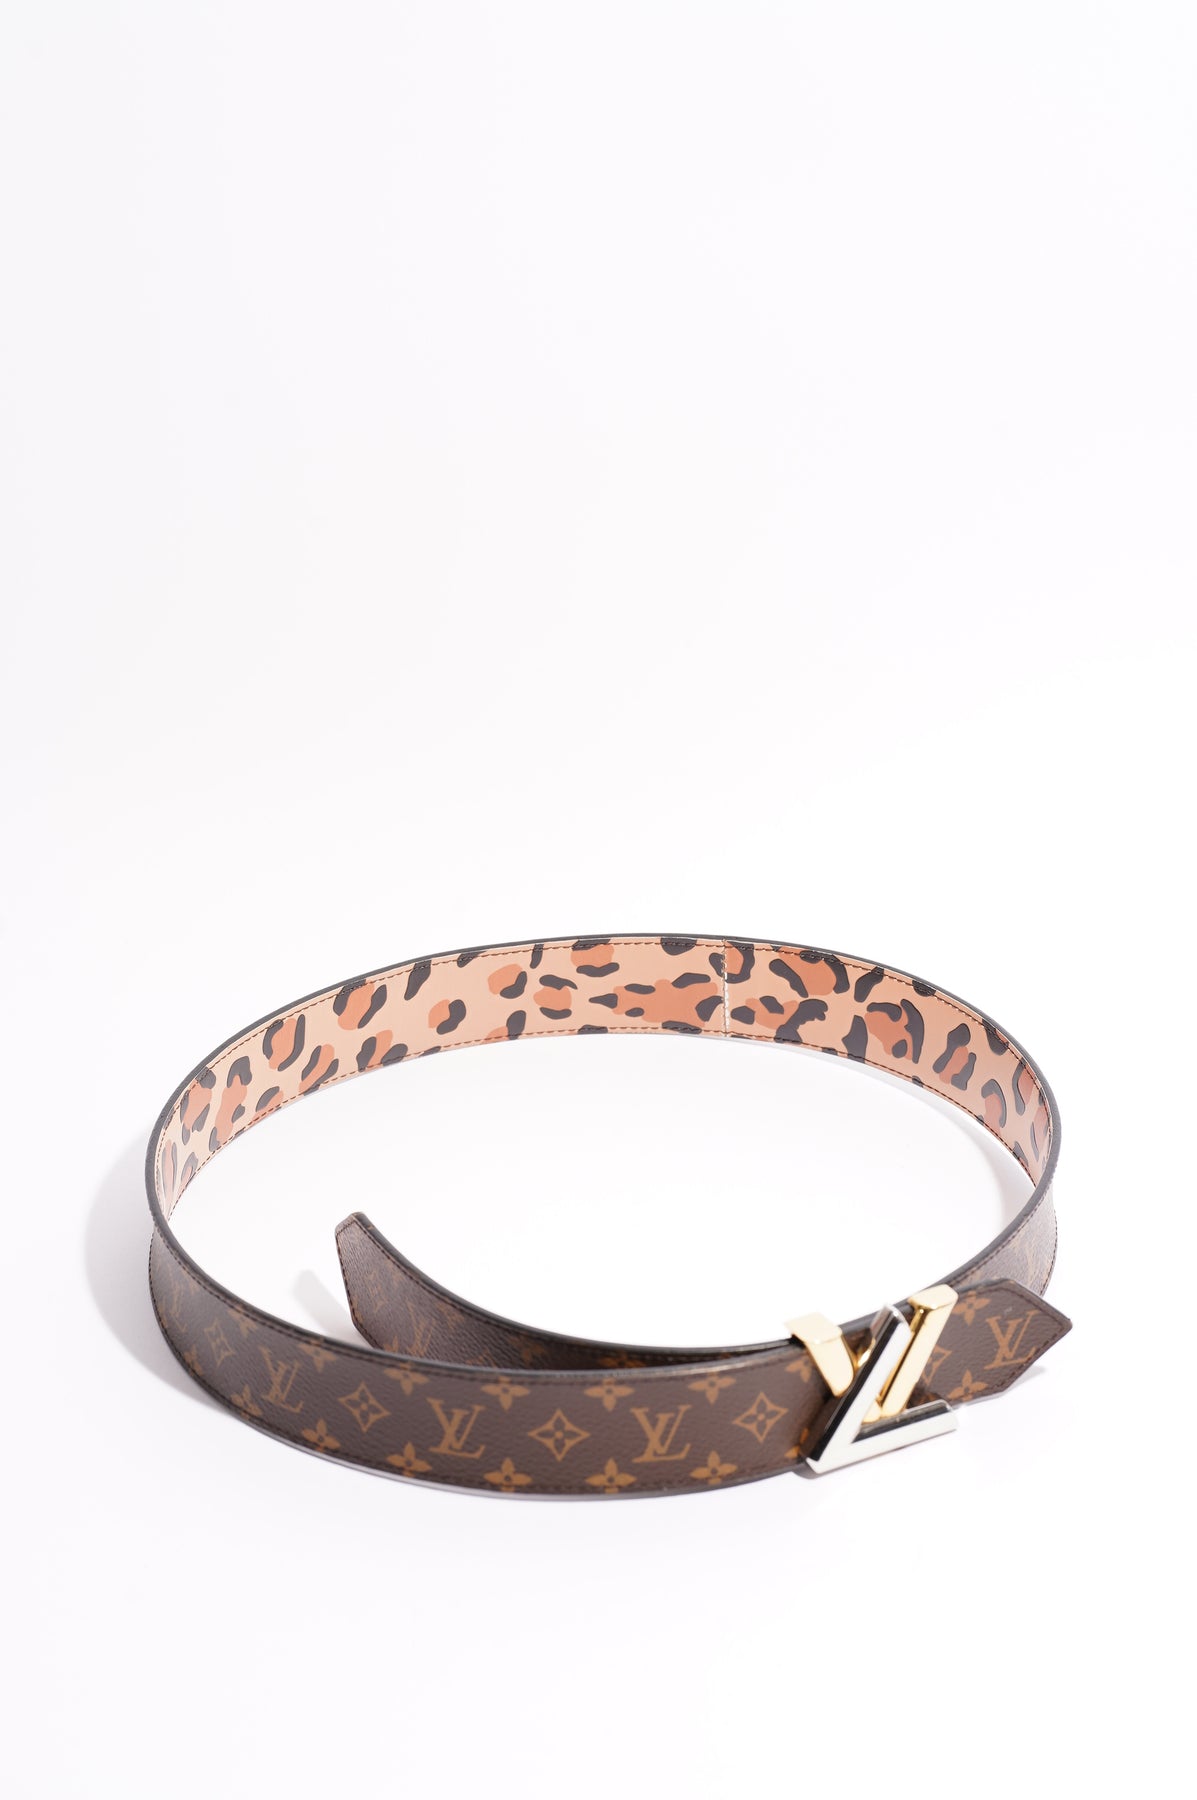 Twist leather belt Louis Vuitton Brown size 90 cm in Leather